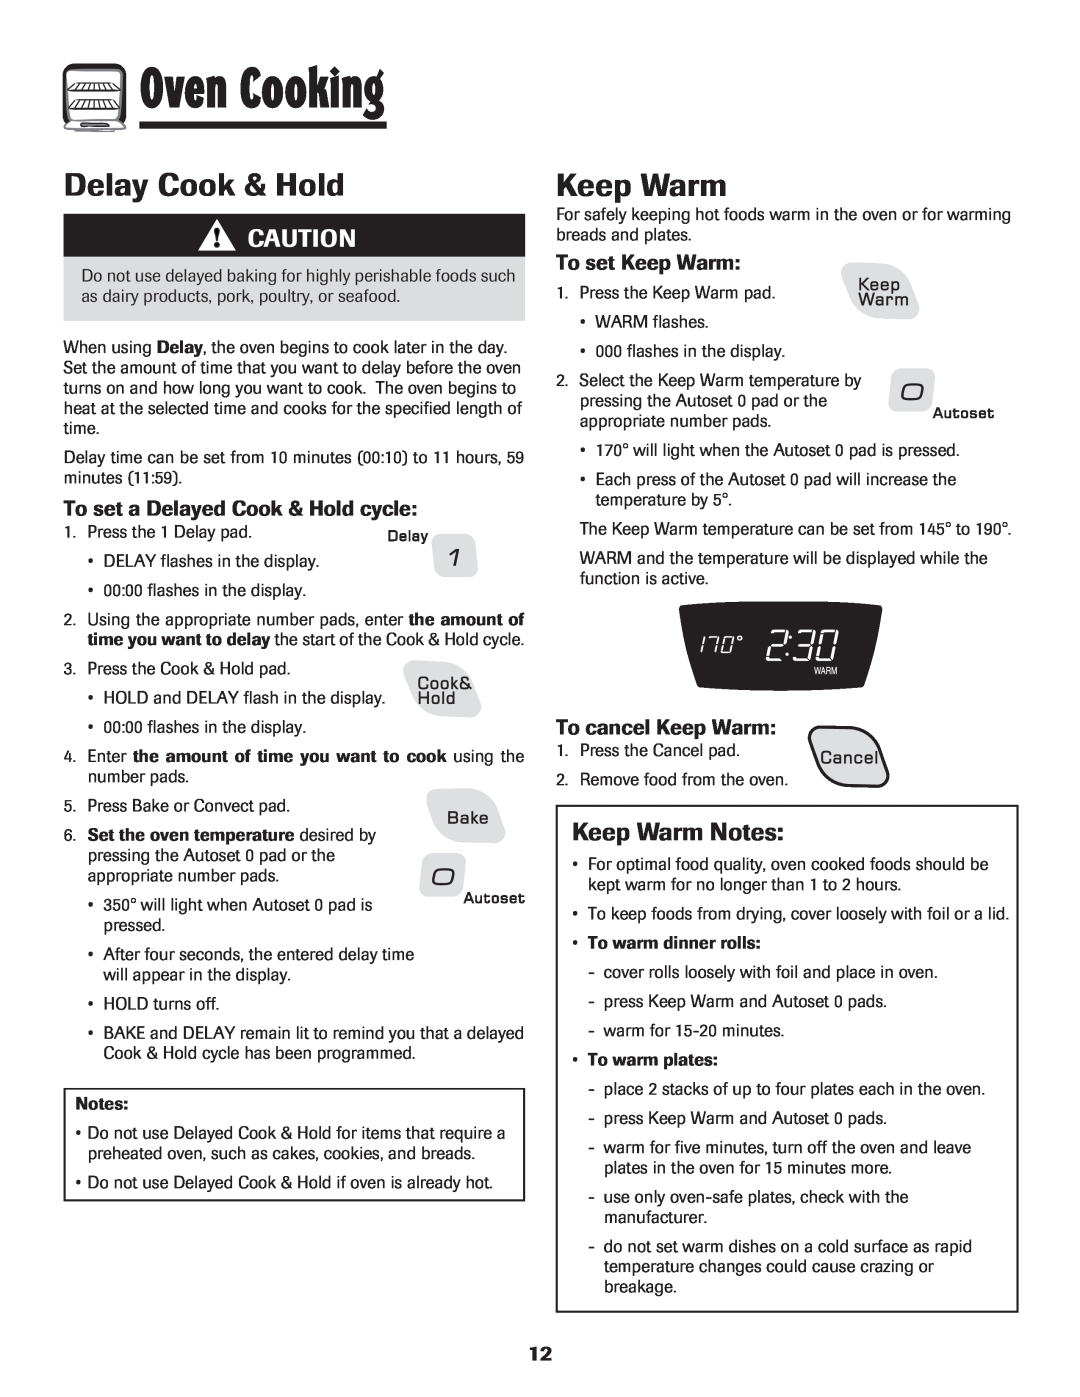 Amana AER5845RAW warranty Delay Cook & Hold, Keep Warm Notes, To set a Delayed Cook & Hold cycle, To set Keep Warm 